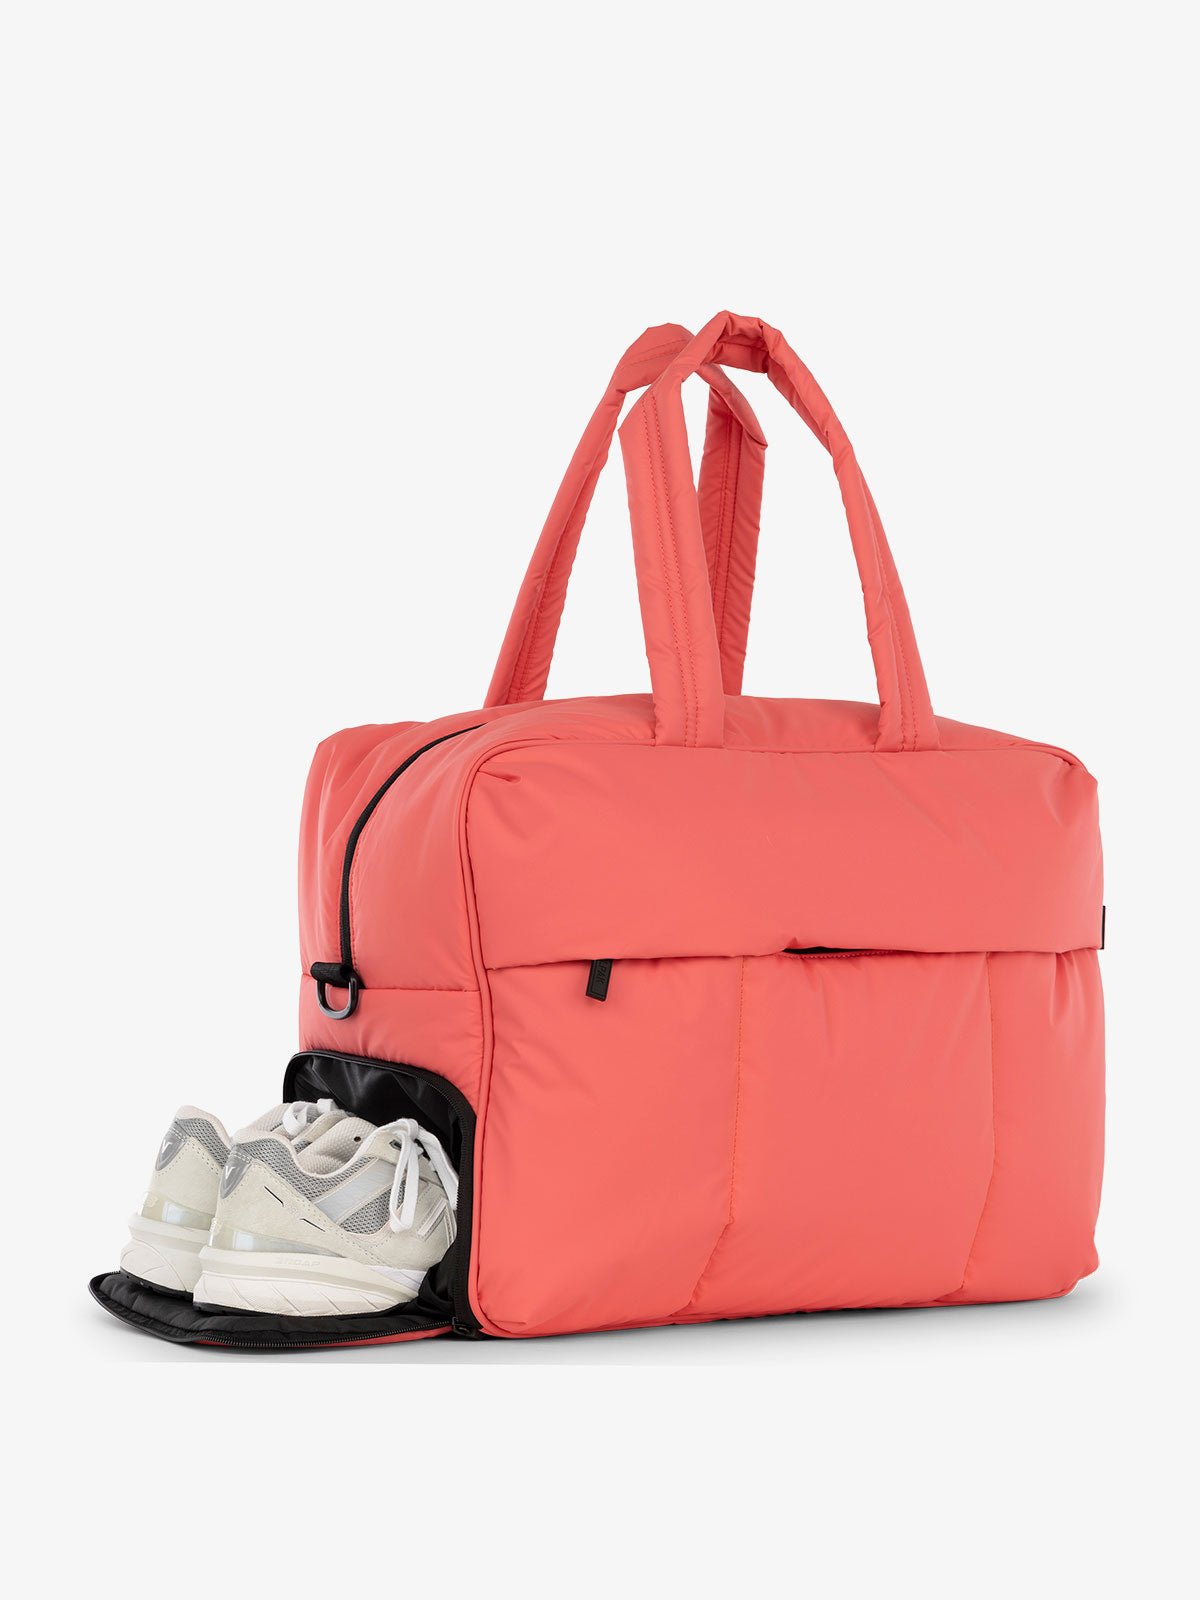 CALPAK Luka large duffel bag with side shoe compartment and dual handles in watermelon pink